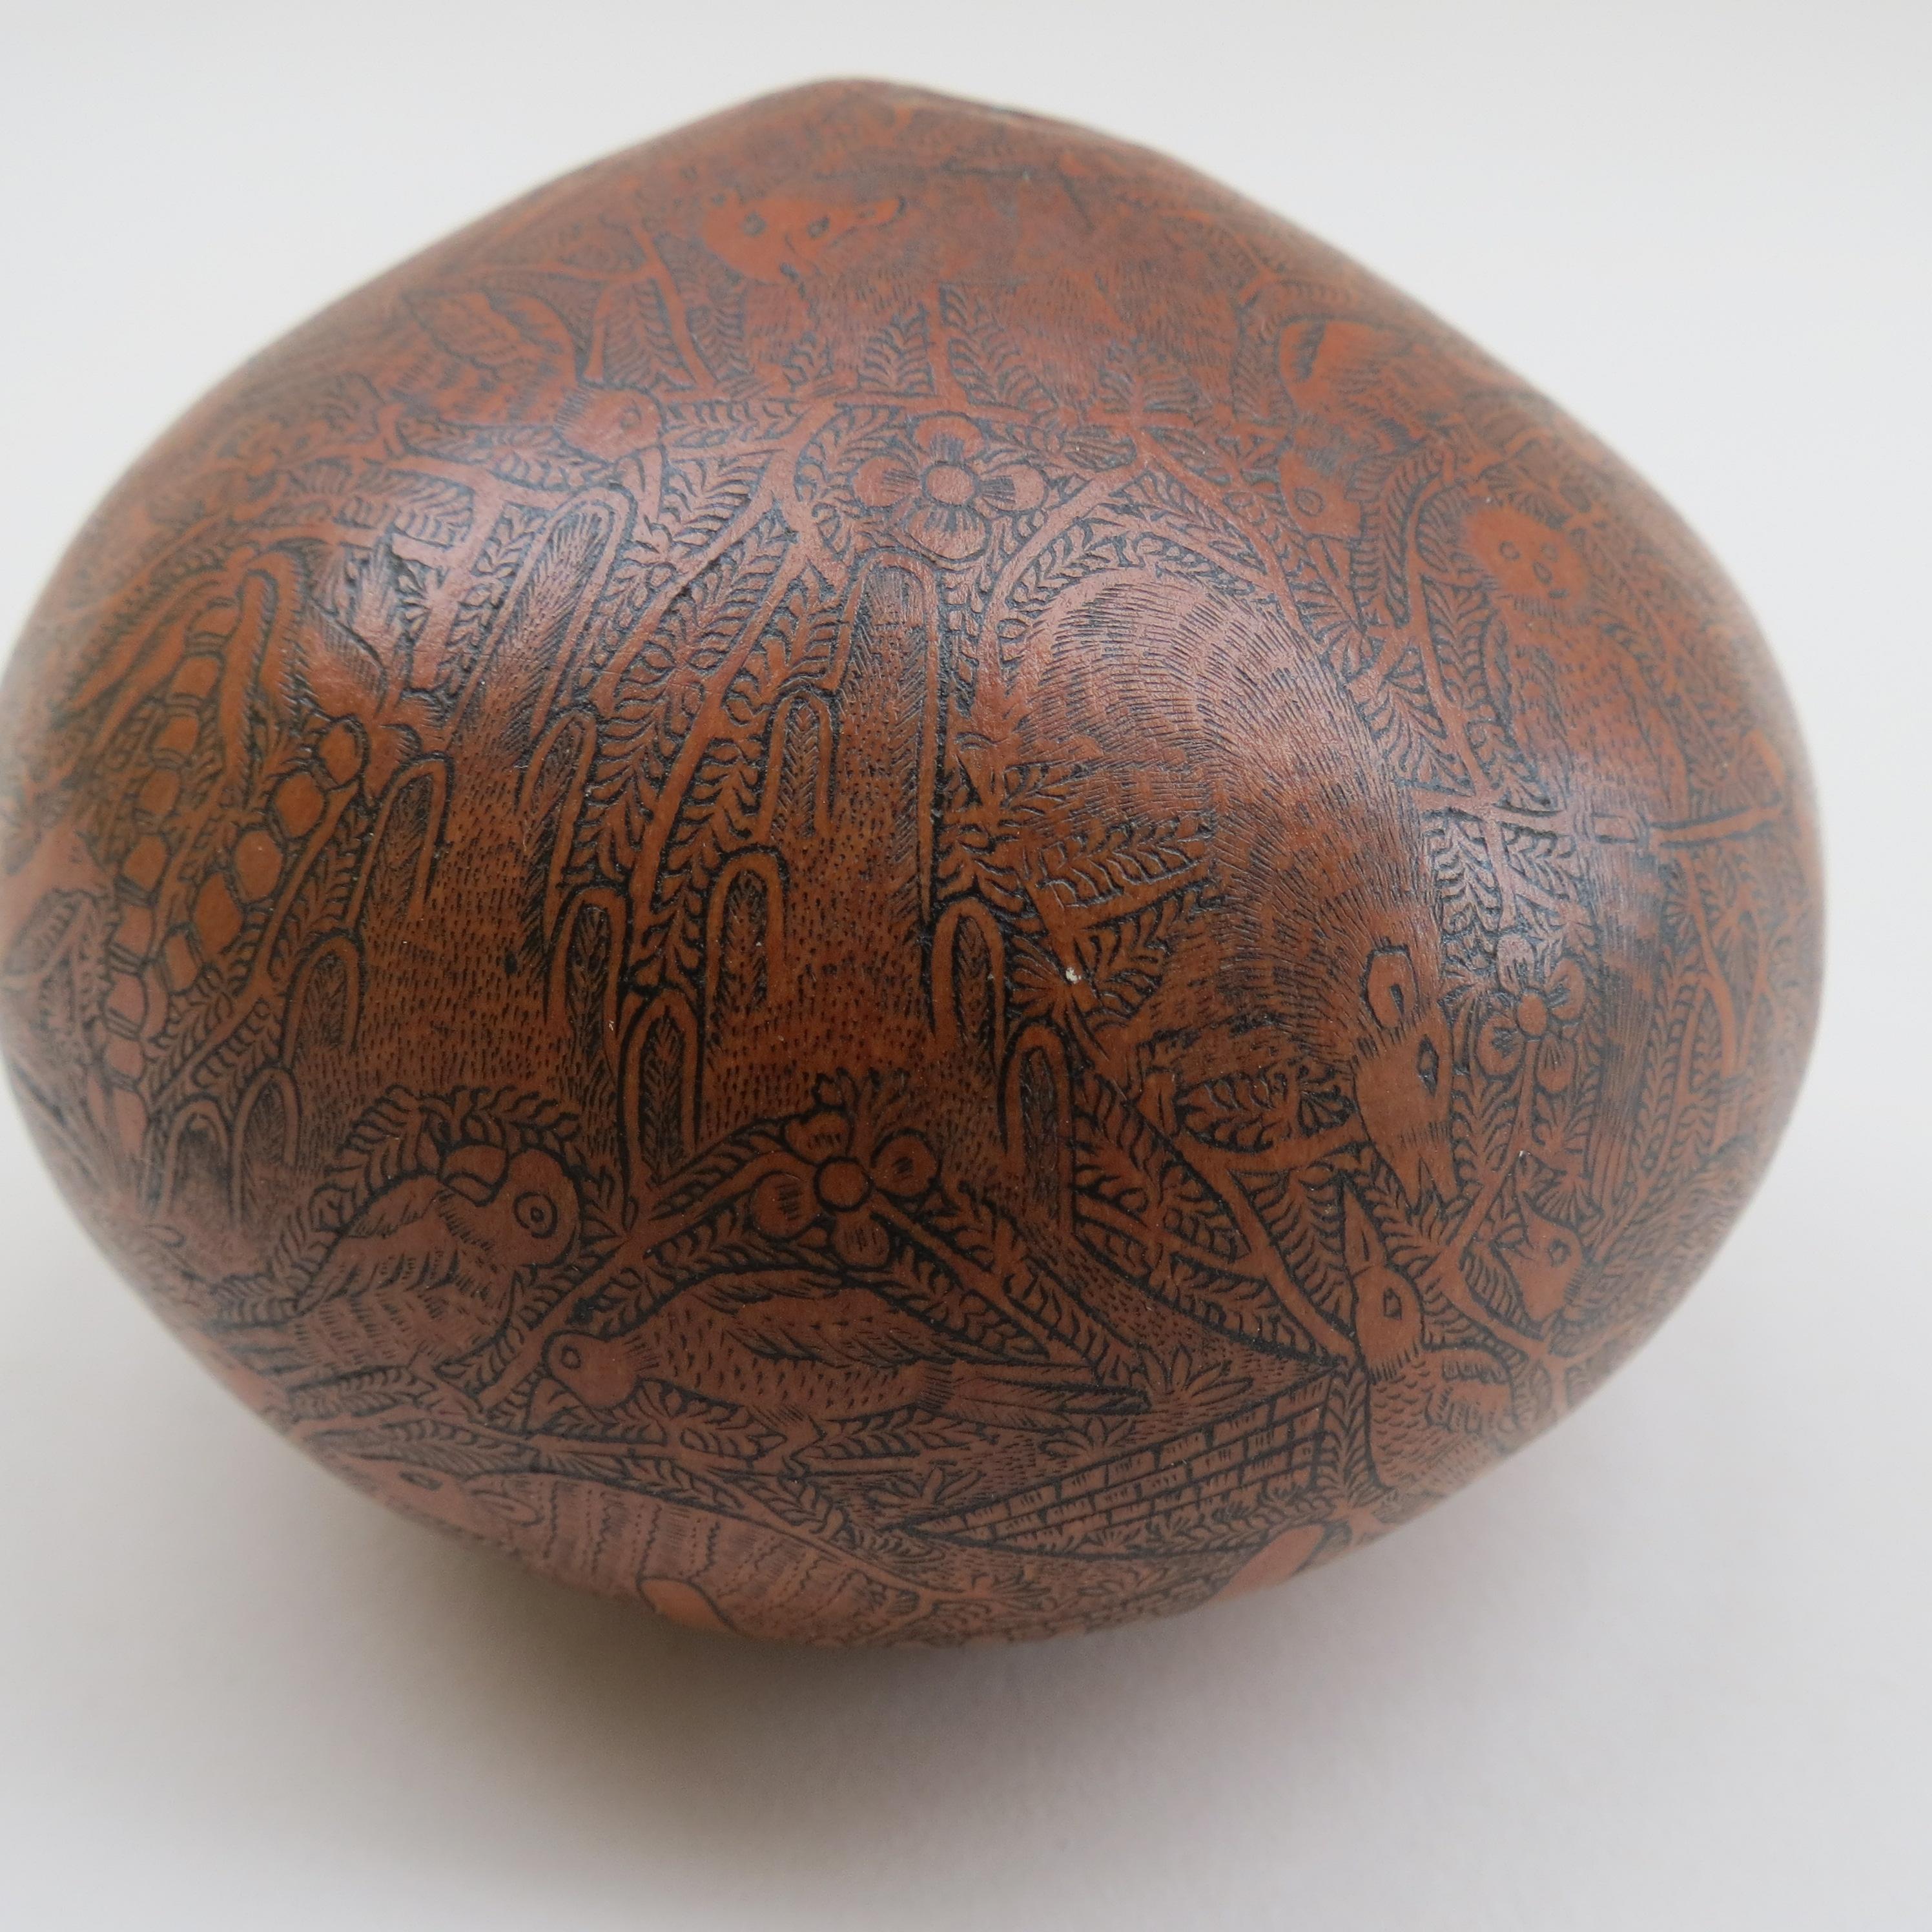 Peruvian Vintage Hand Carved Gourd from South American